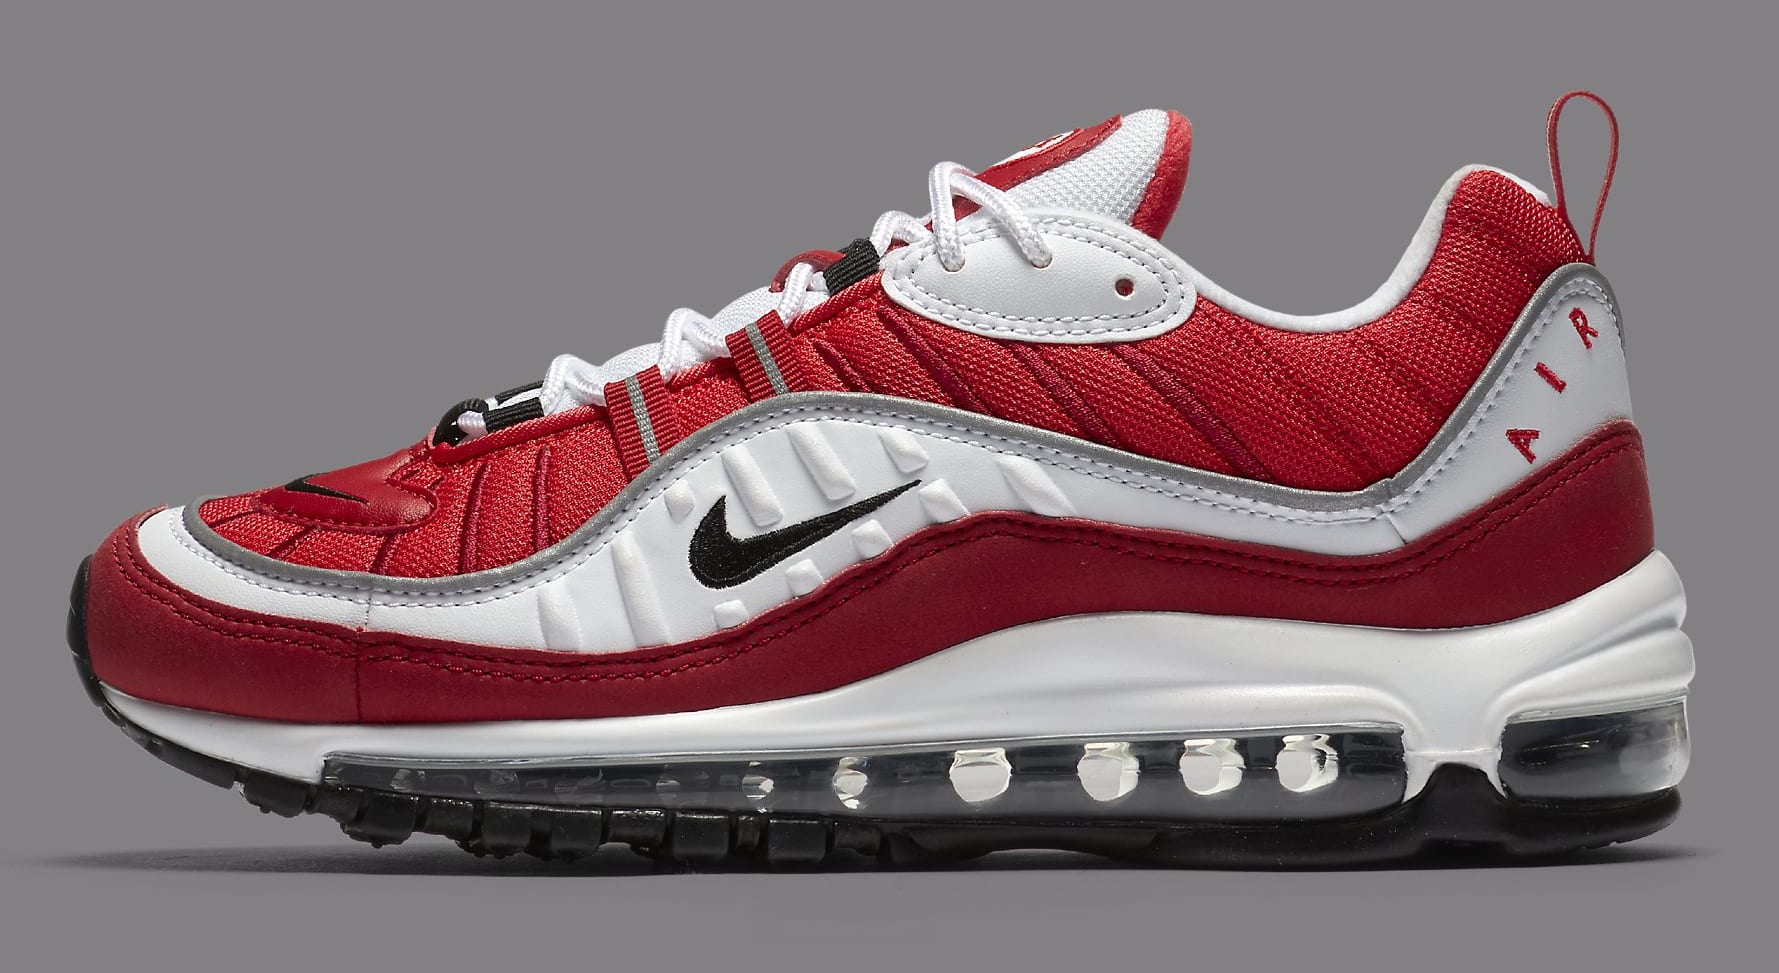 Kamer Toestand Begrafenis Nike Air Max 98 White/Black-Gym Red-Reflect Silver AH6799-101 Images | Sole  Collector